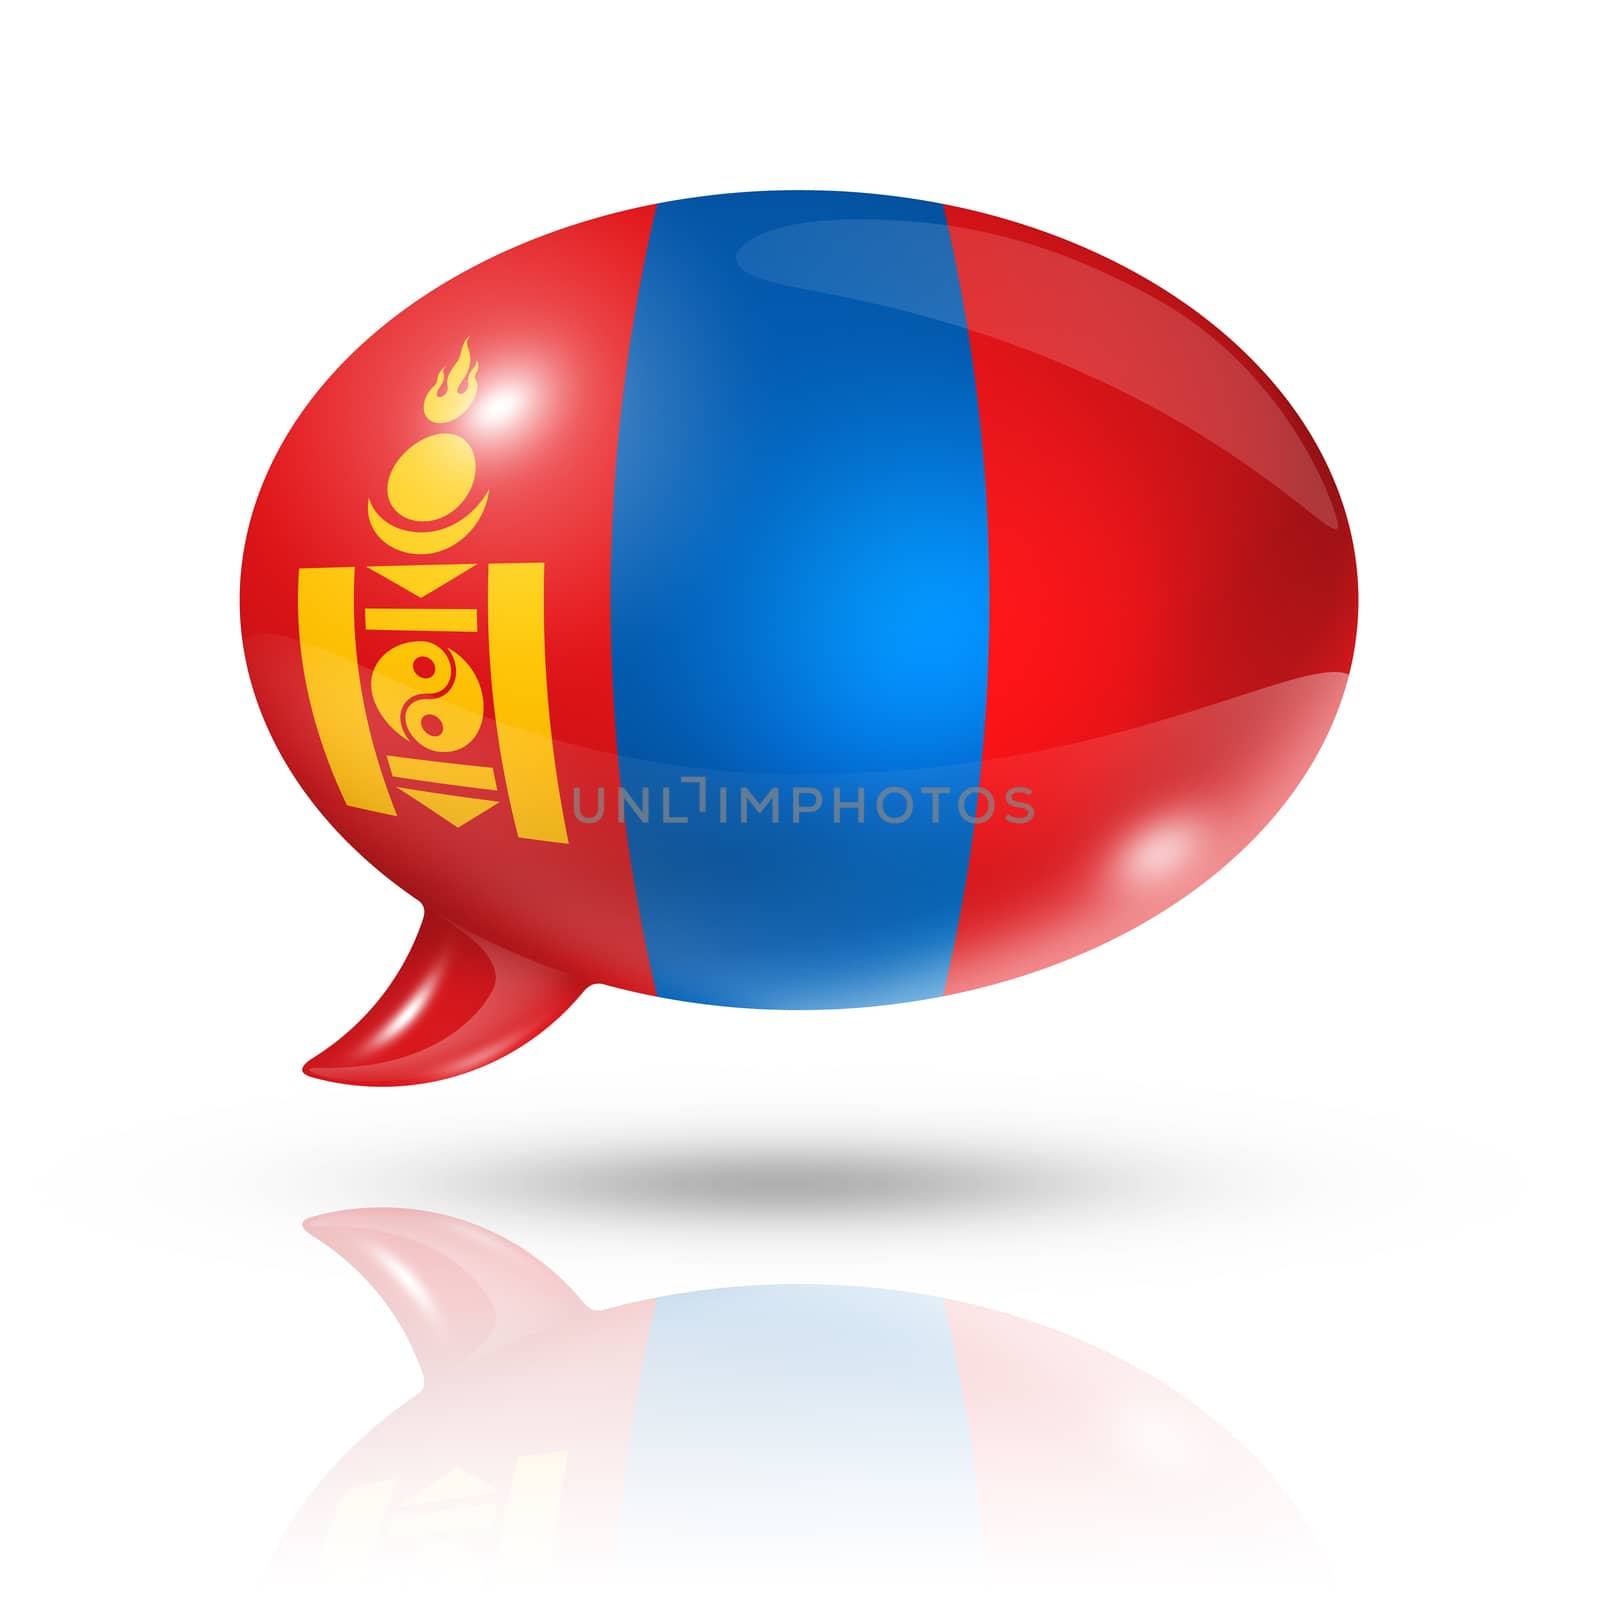 three dimensional Mongolia flag in a speech bubble isolated on white with clipping path